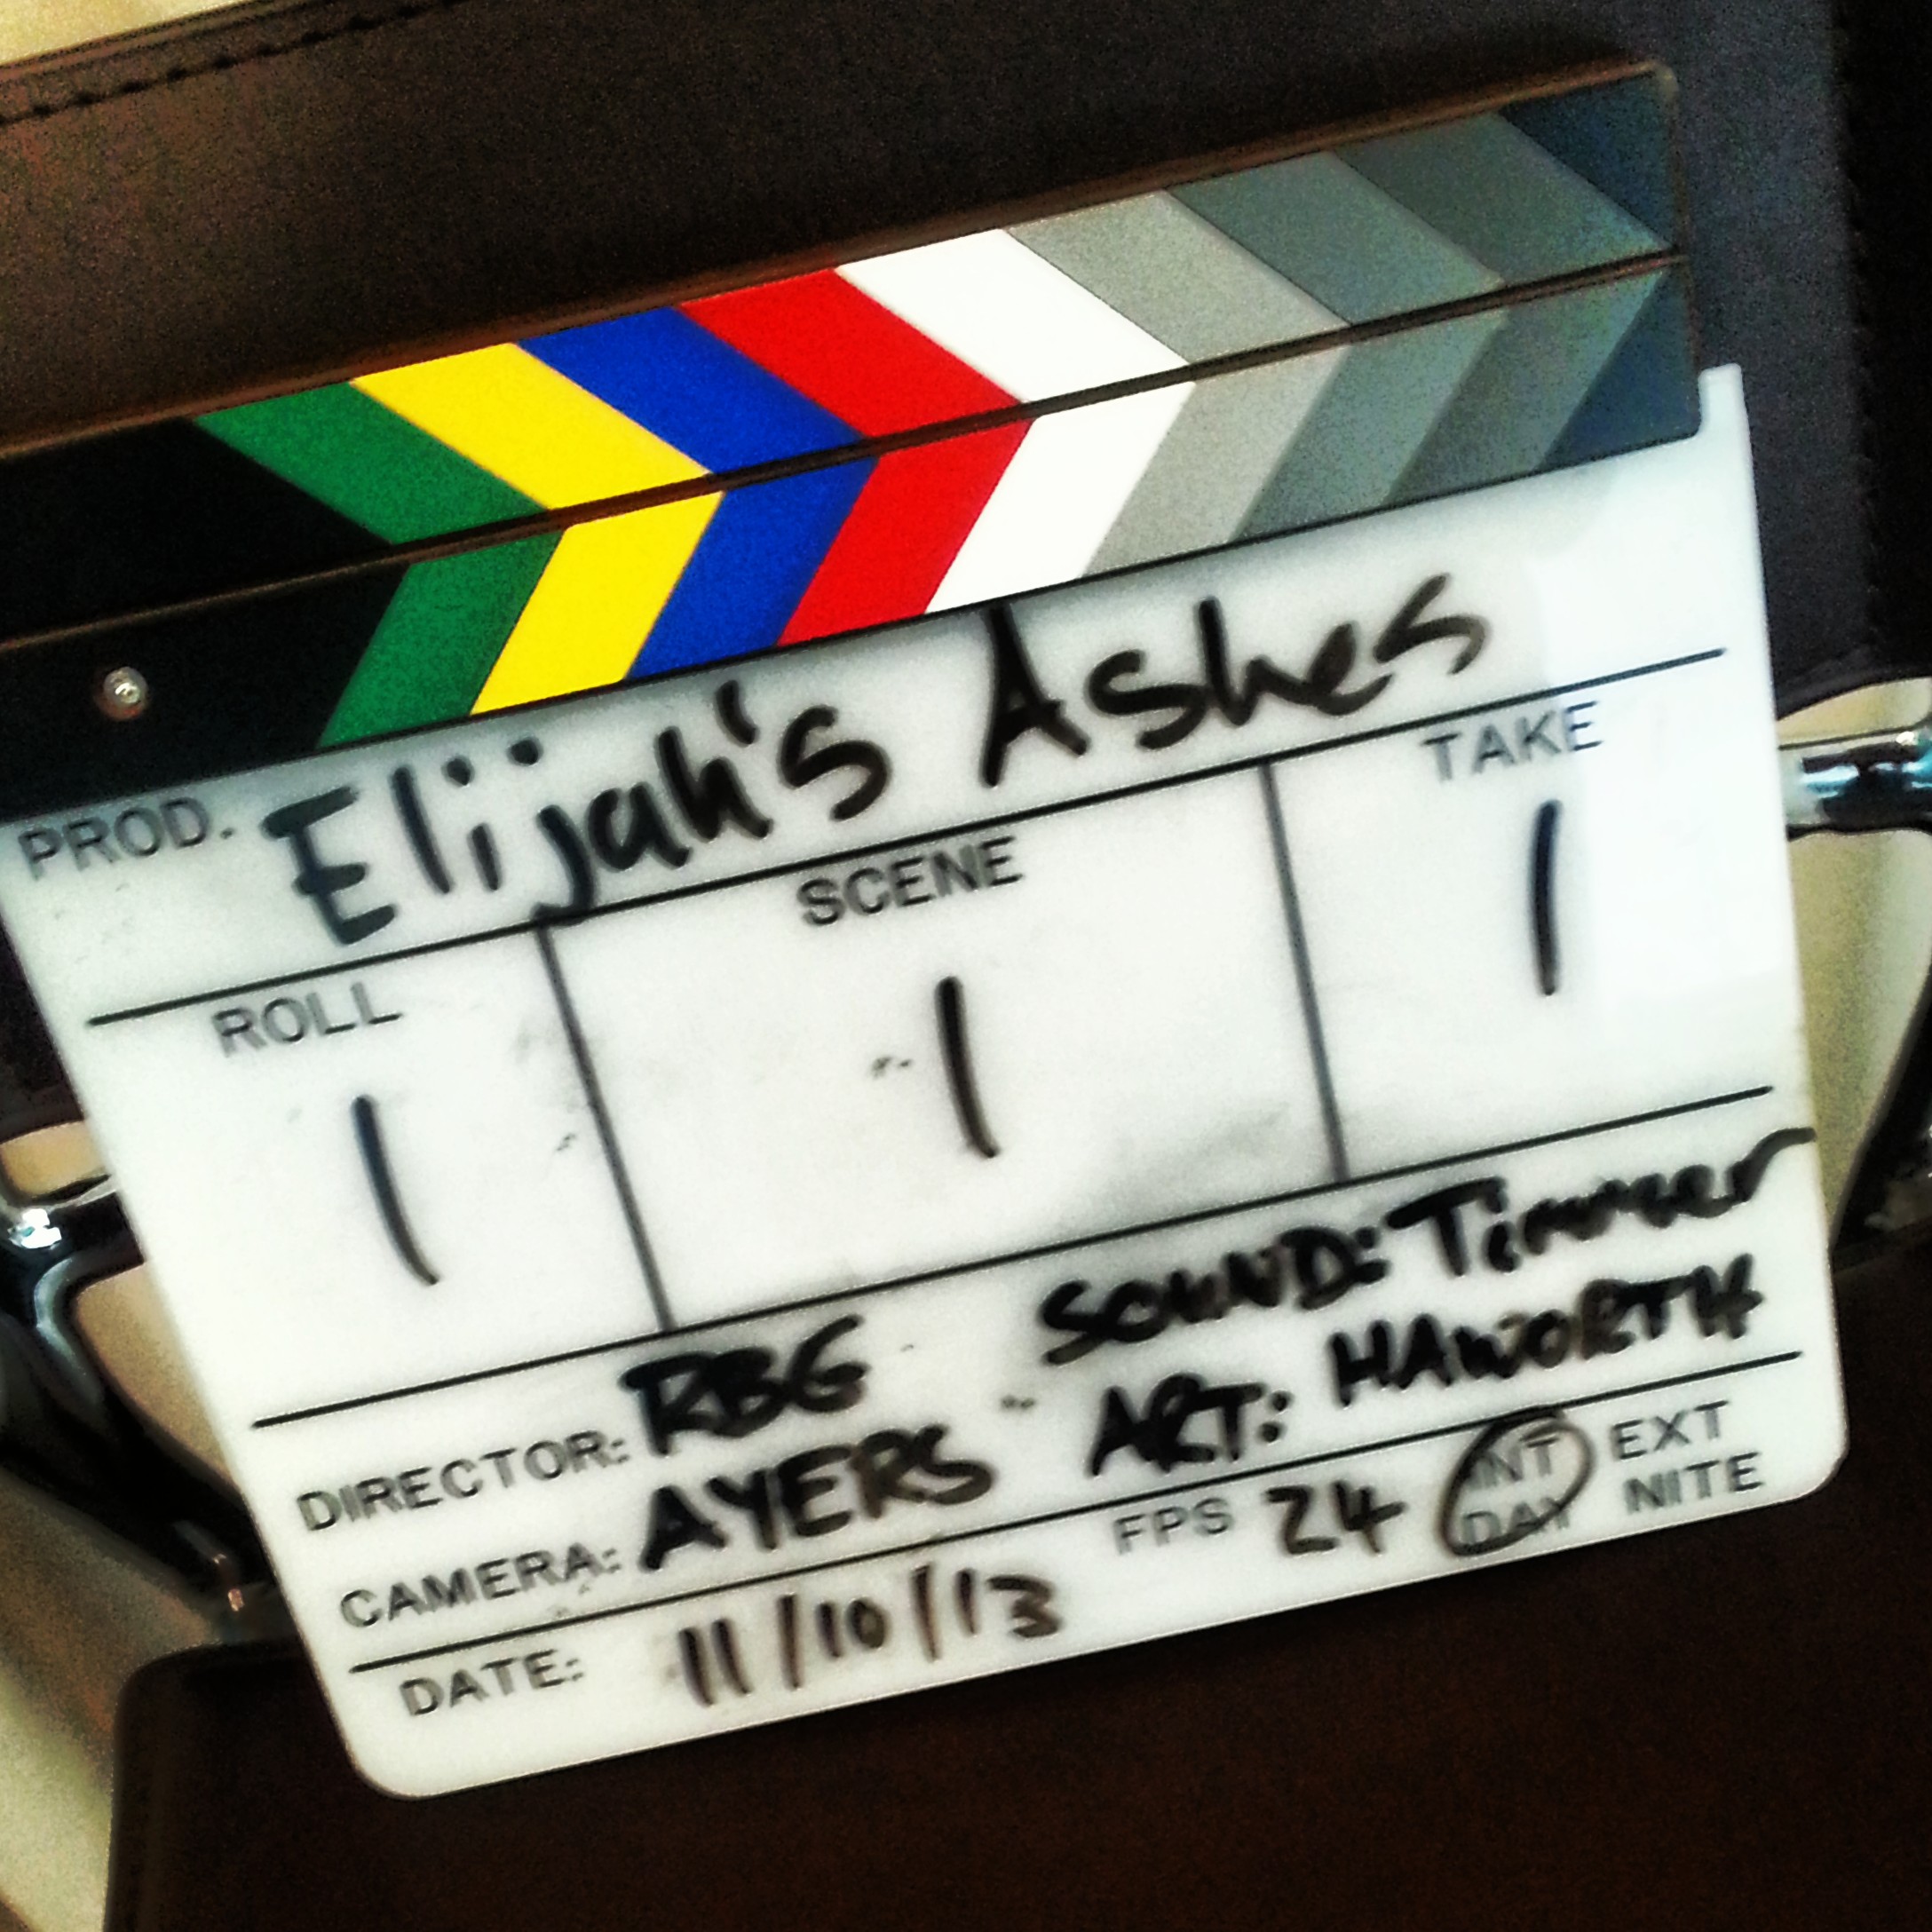 First Day Slate!